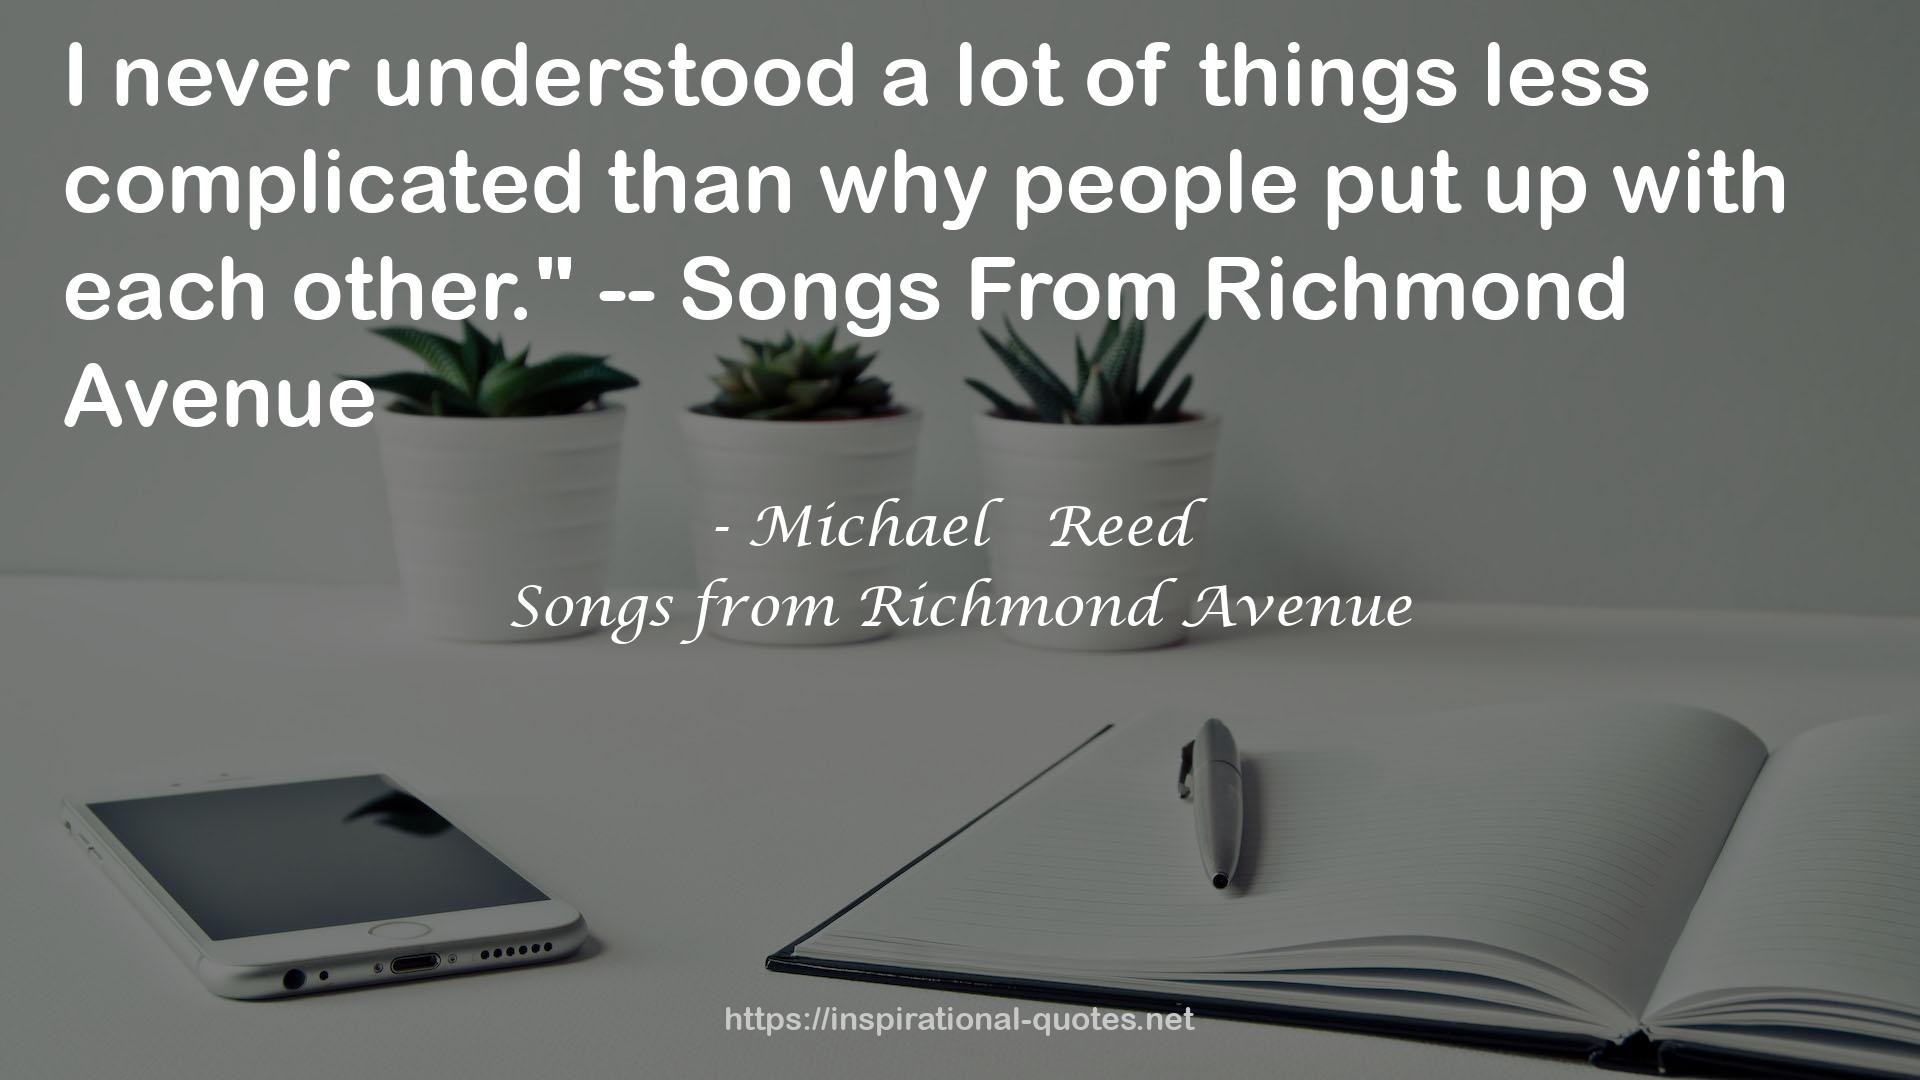 Songs from Richmond Avenue QUOTES